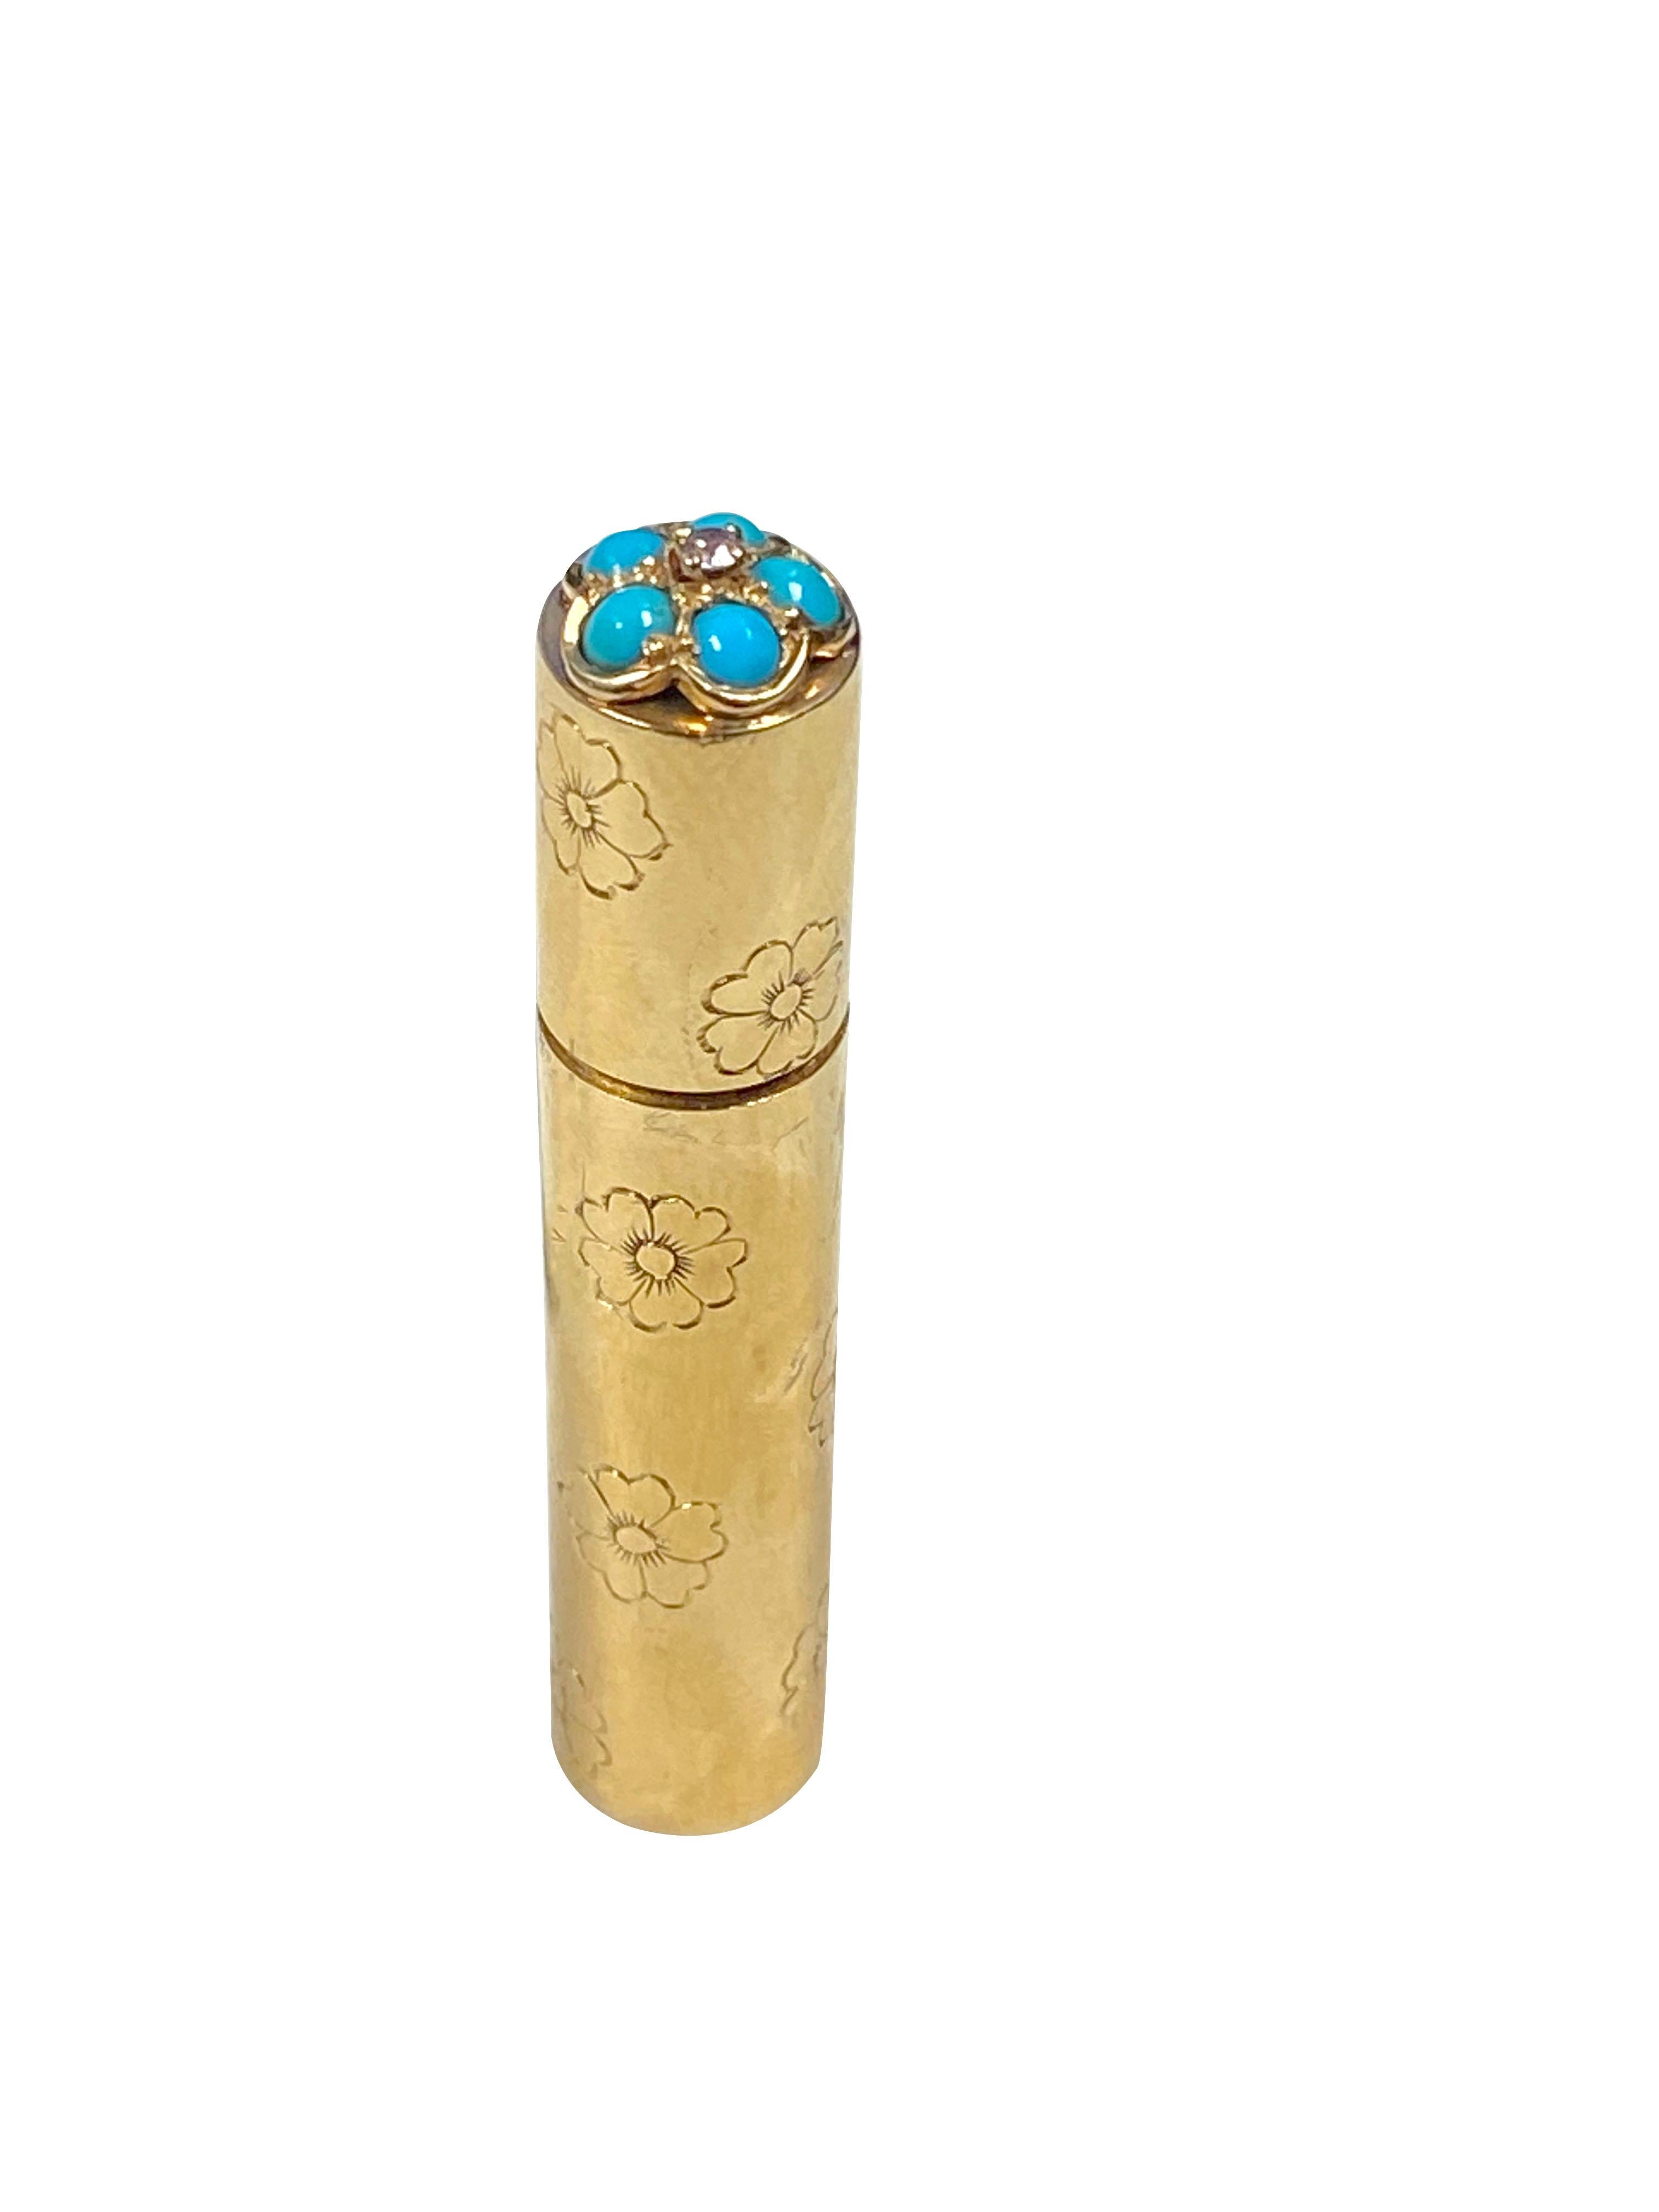 Circa 1950s Van Cleef & Arpels 18K Yellow Gold Perfume, measuring 2 3/8 inches in height 7/16 inch in diameter and weighing 21 Grams. Having hand engraved Flowers and the top set with Turquoise and a Diamond. 